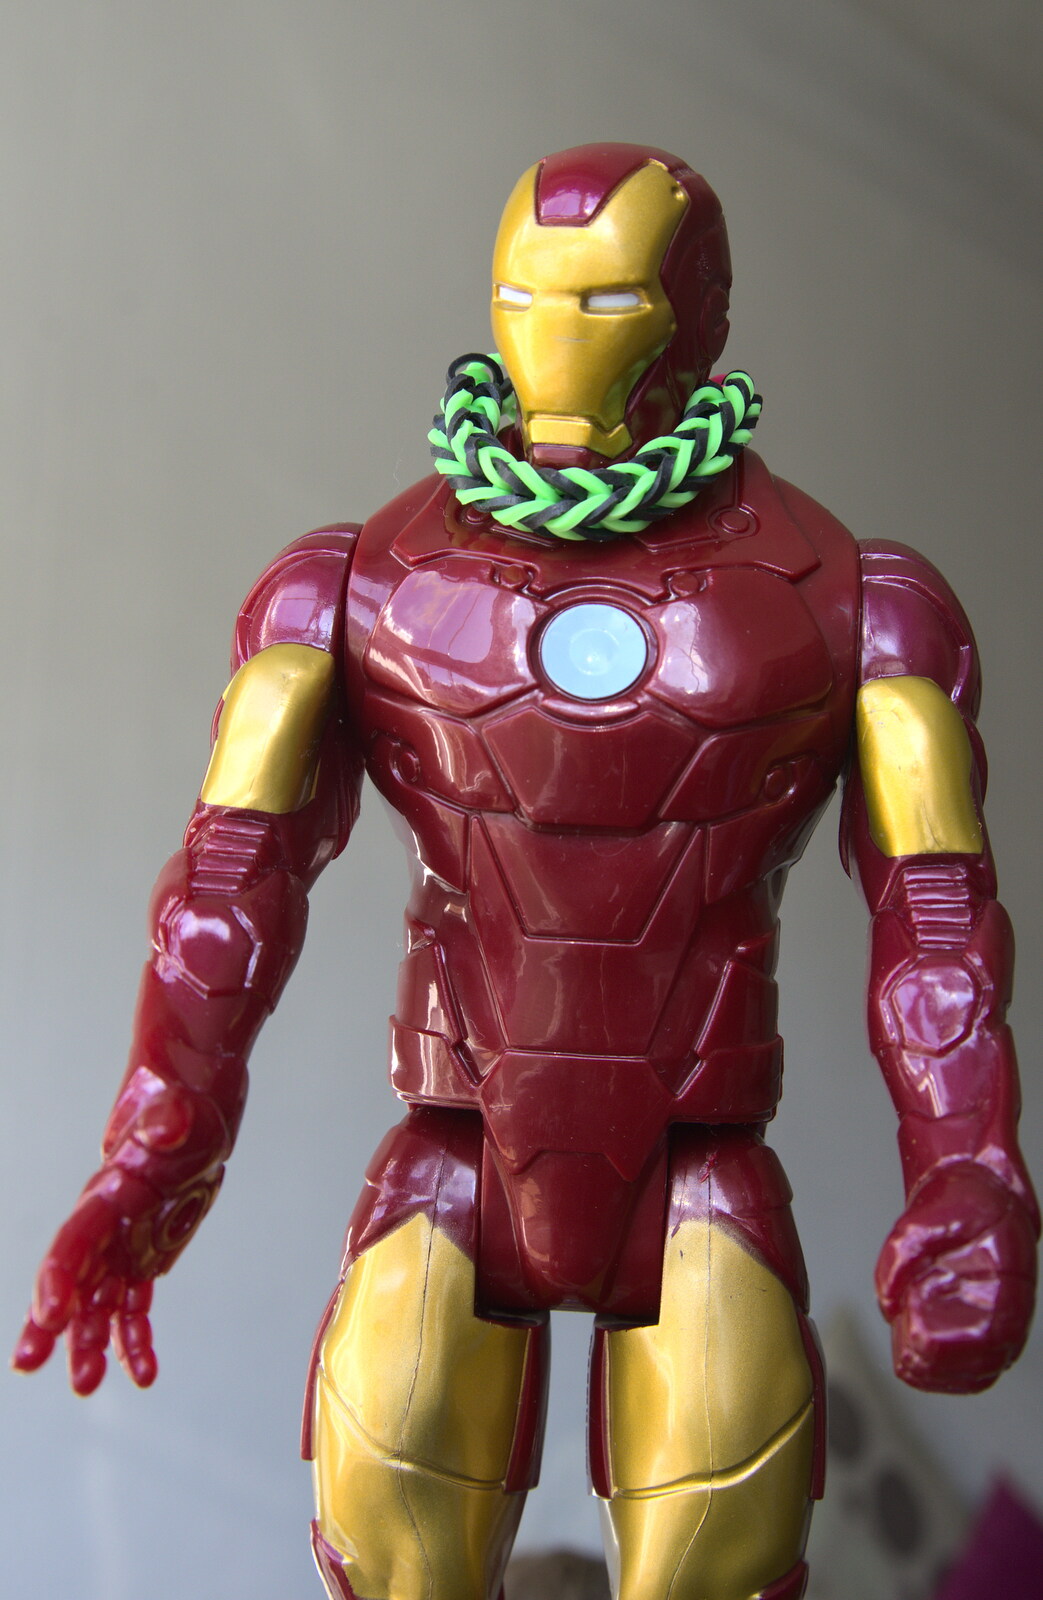 An Ironman action figure with added Loom Band from Camping at Silver Strand, Wicklow, County Wicklow, Ireland - 7th August 2014